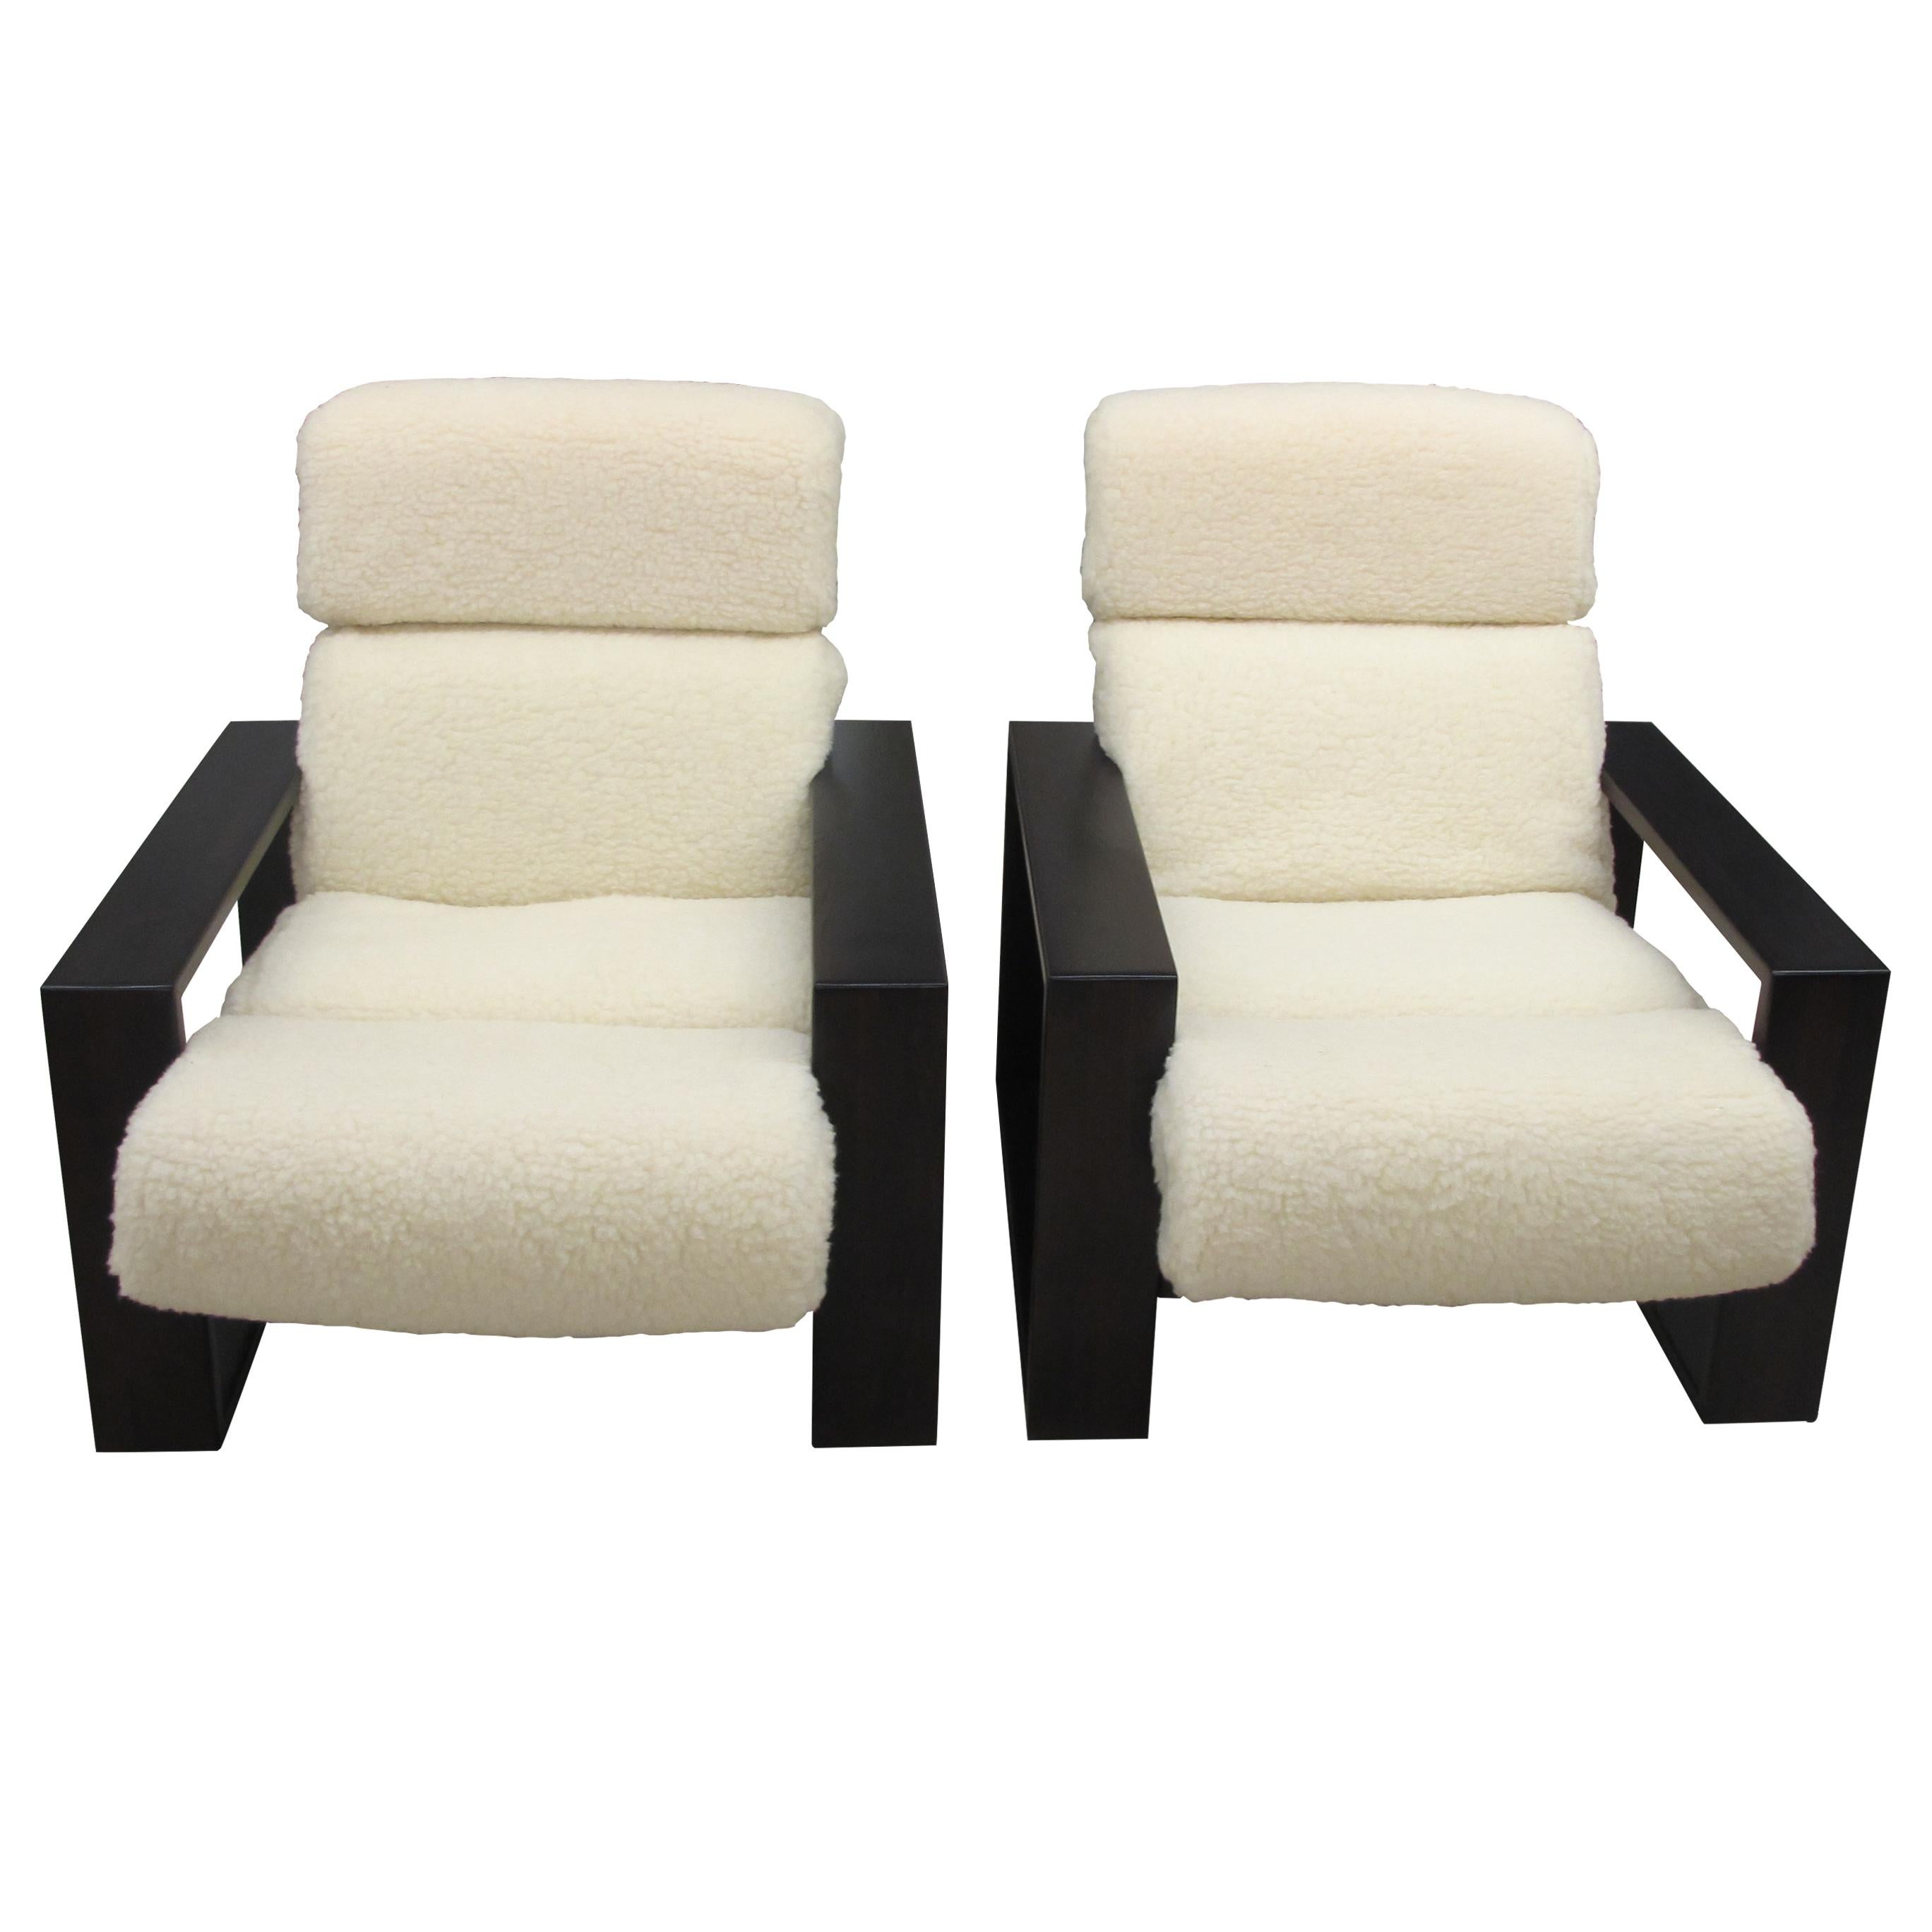 1970s Large pair of Structural armchairs with a wooden frame made for Peem Oy of Finland. The chairs are very comfortable with large armrests and great back support. Each armchair is made of three pieces; the frame, the cushion support which hooks